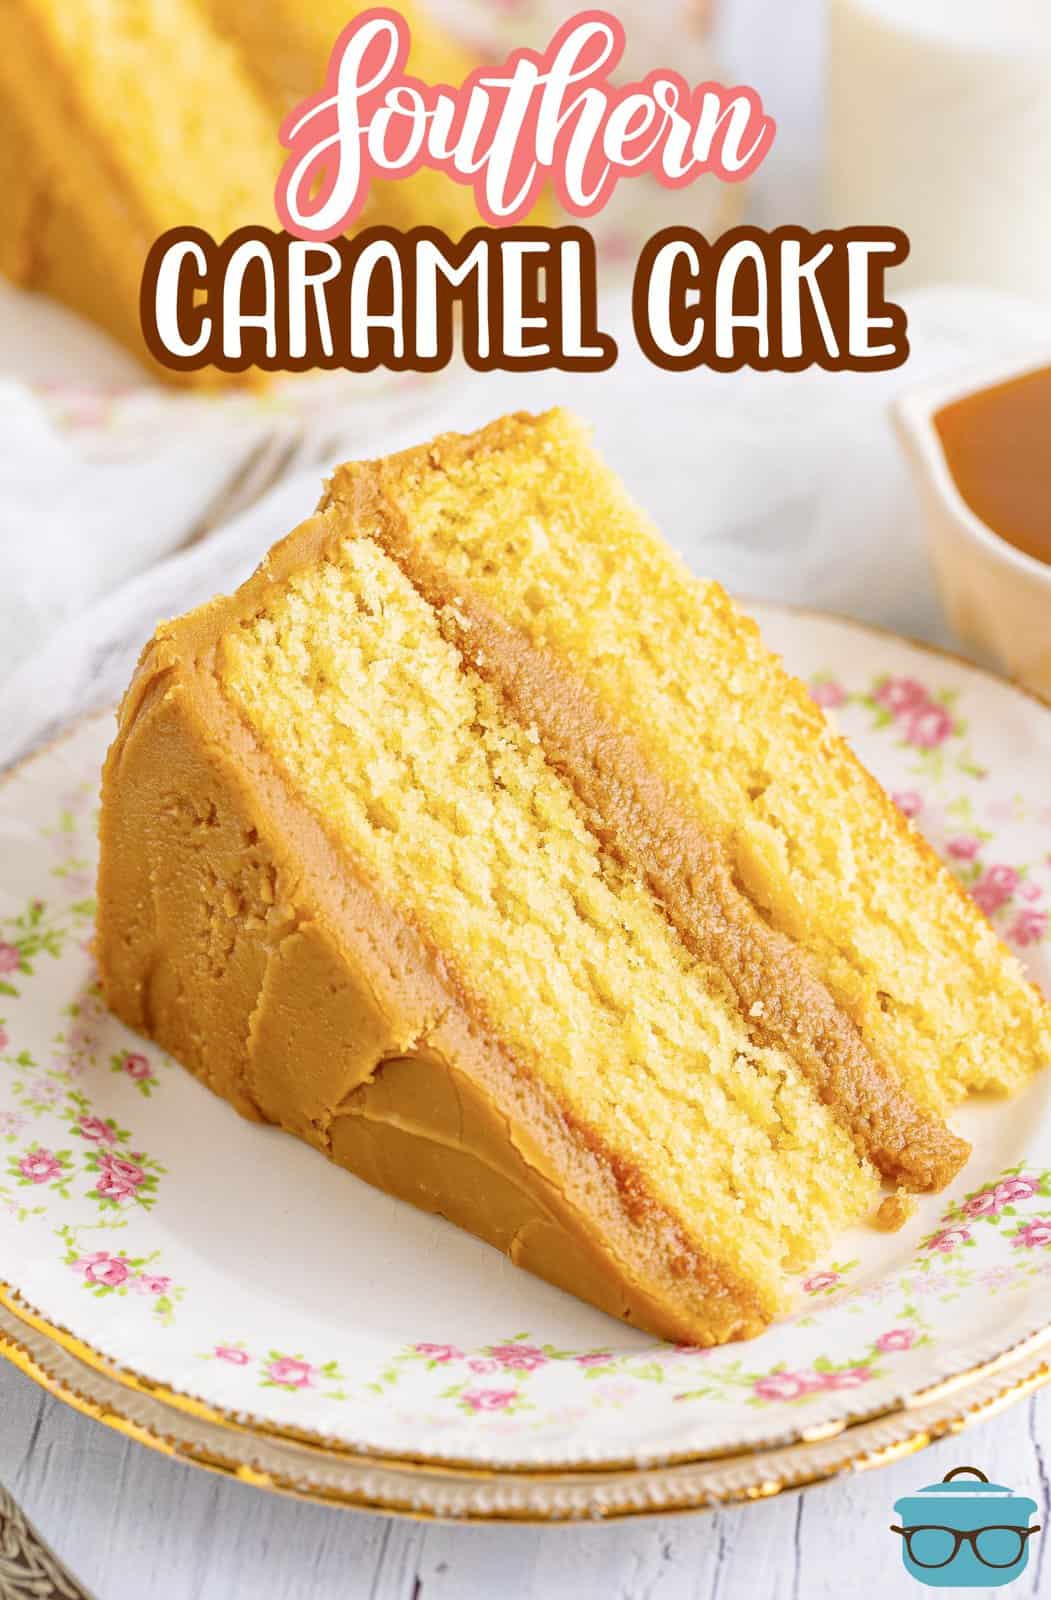 Pinterest image of a slice of Southern Caramel Cake on flower plate.